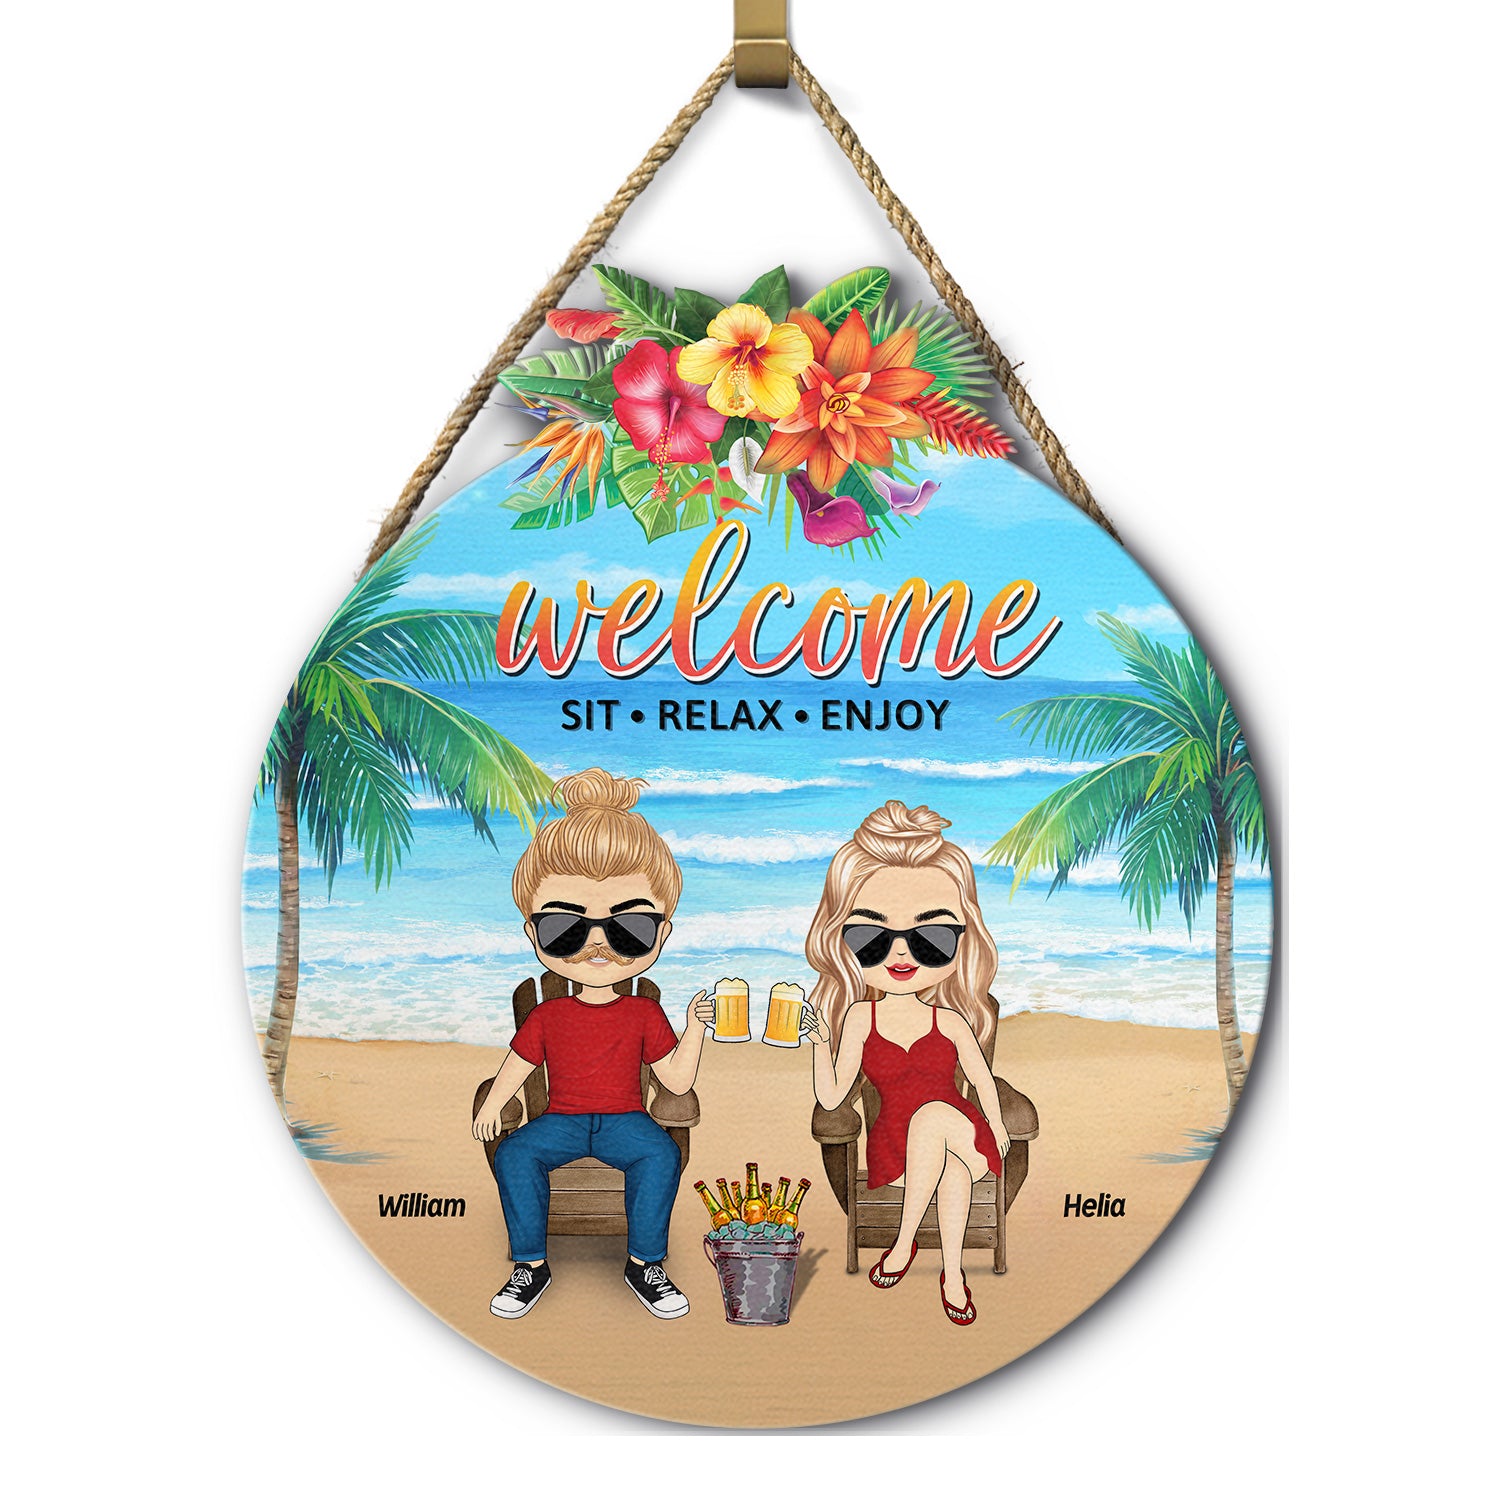 Welcome Sit Relax Enjoy Summer Beach - Birthday, Decor Gift For Wife, Husband, Couple, Family - Personalized Custom Shaped Wood Sign